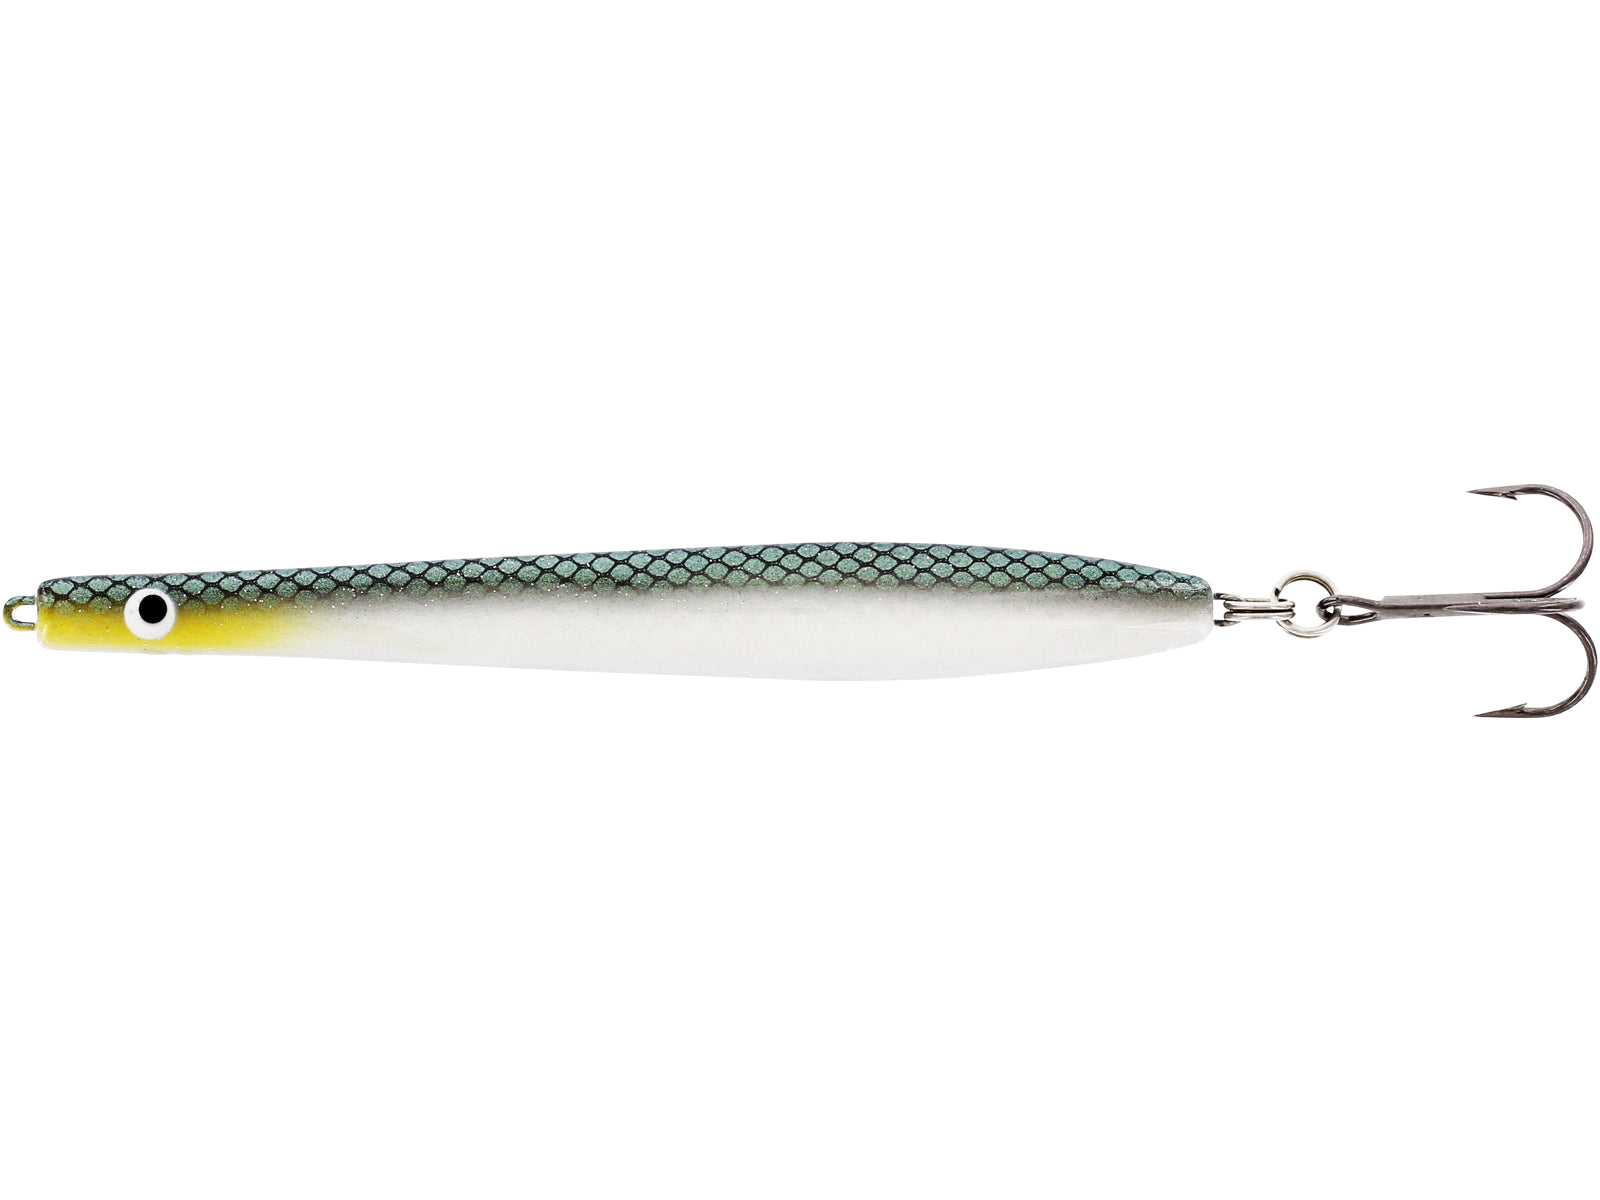 Fishing Lures - Pike Lures - Bass Lures - LRF Fishing Lures